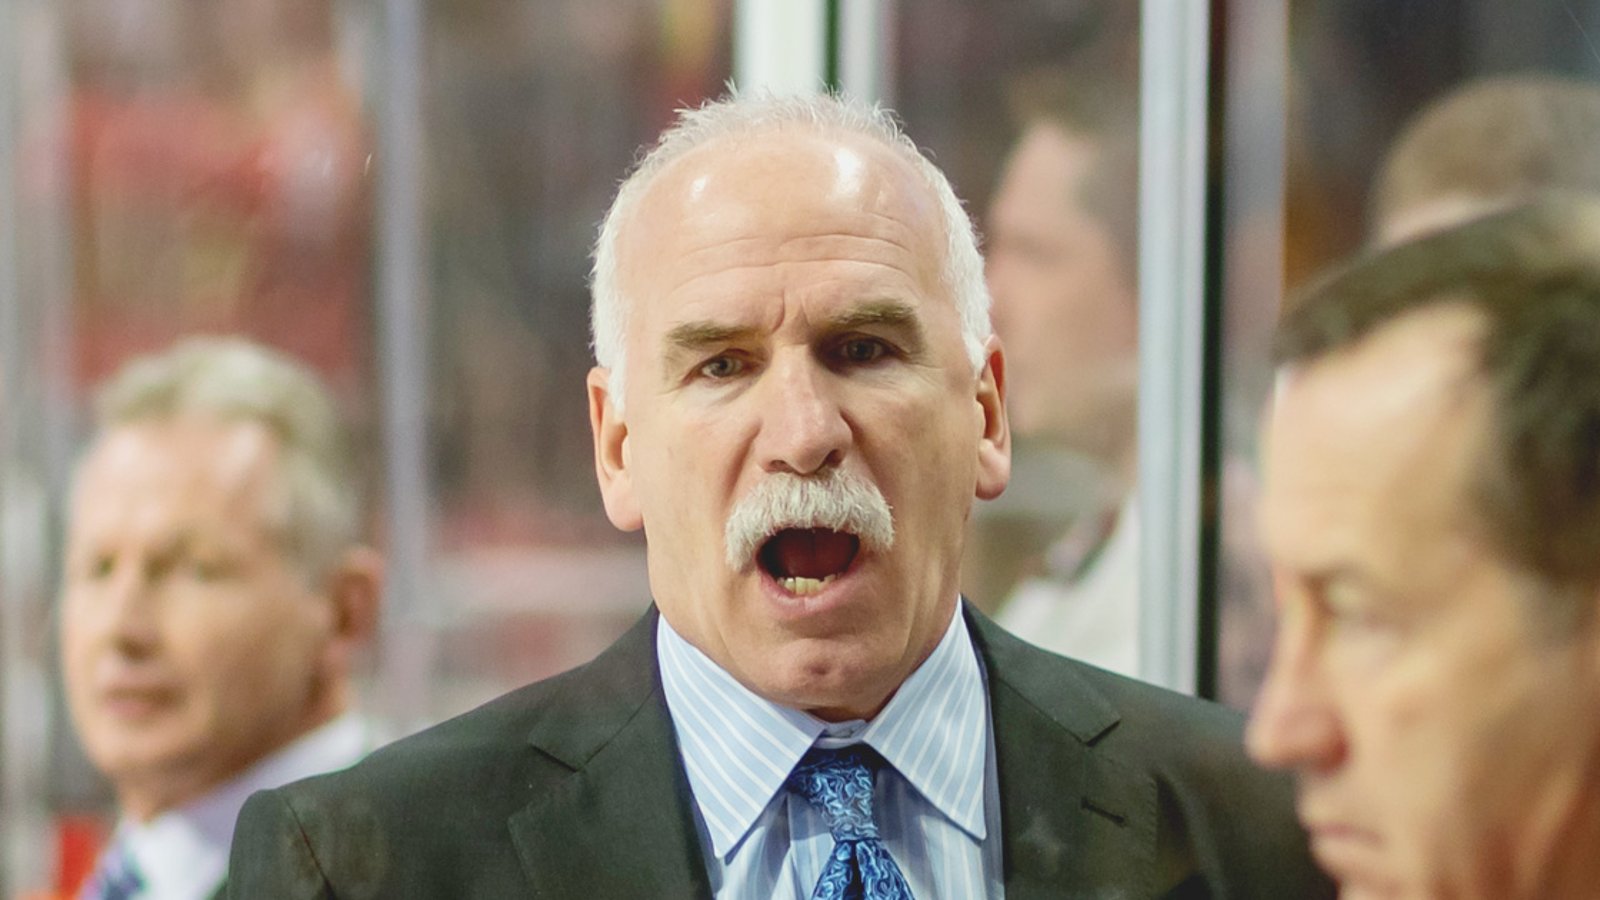 Breaking New : Julien's situation has an impact on coach Q.